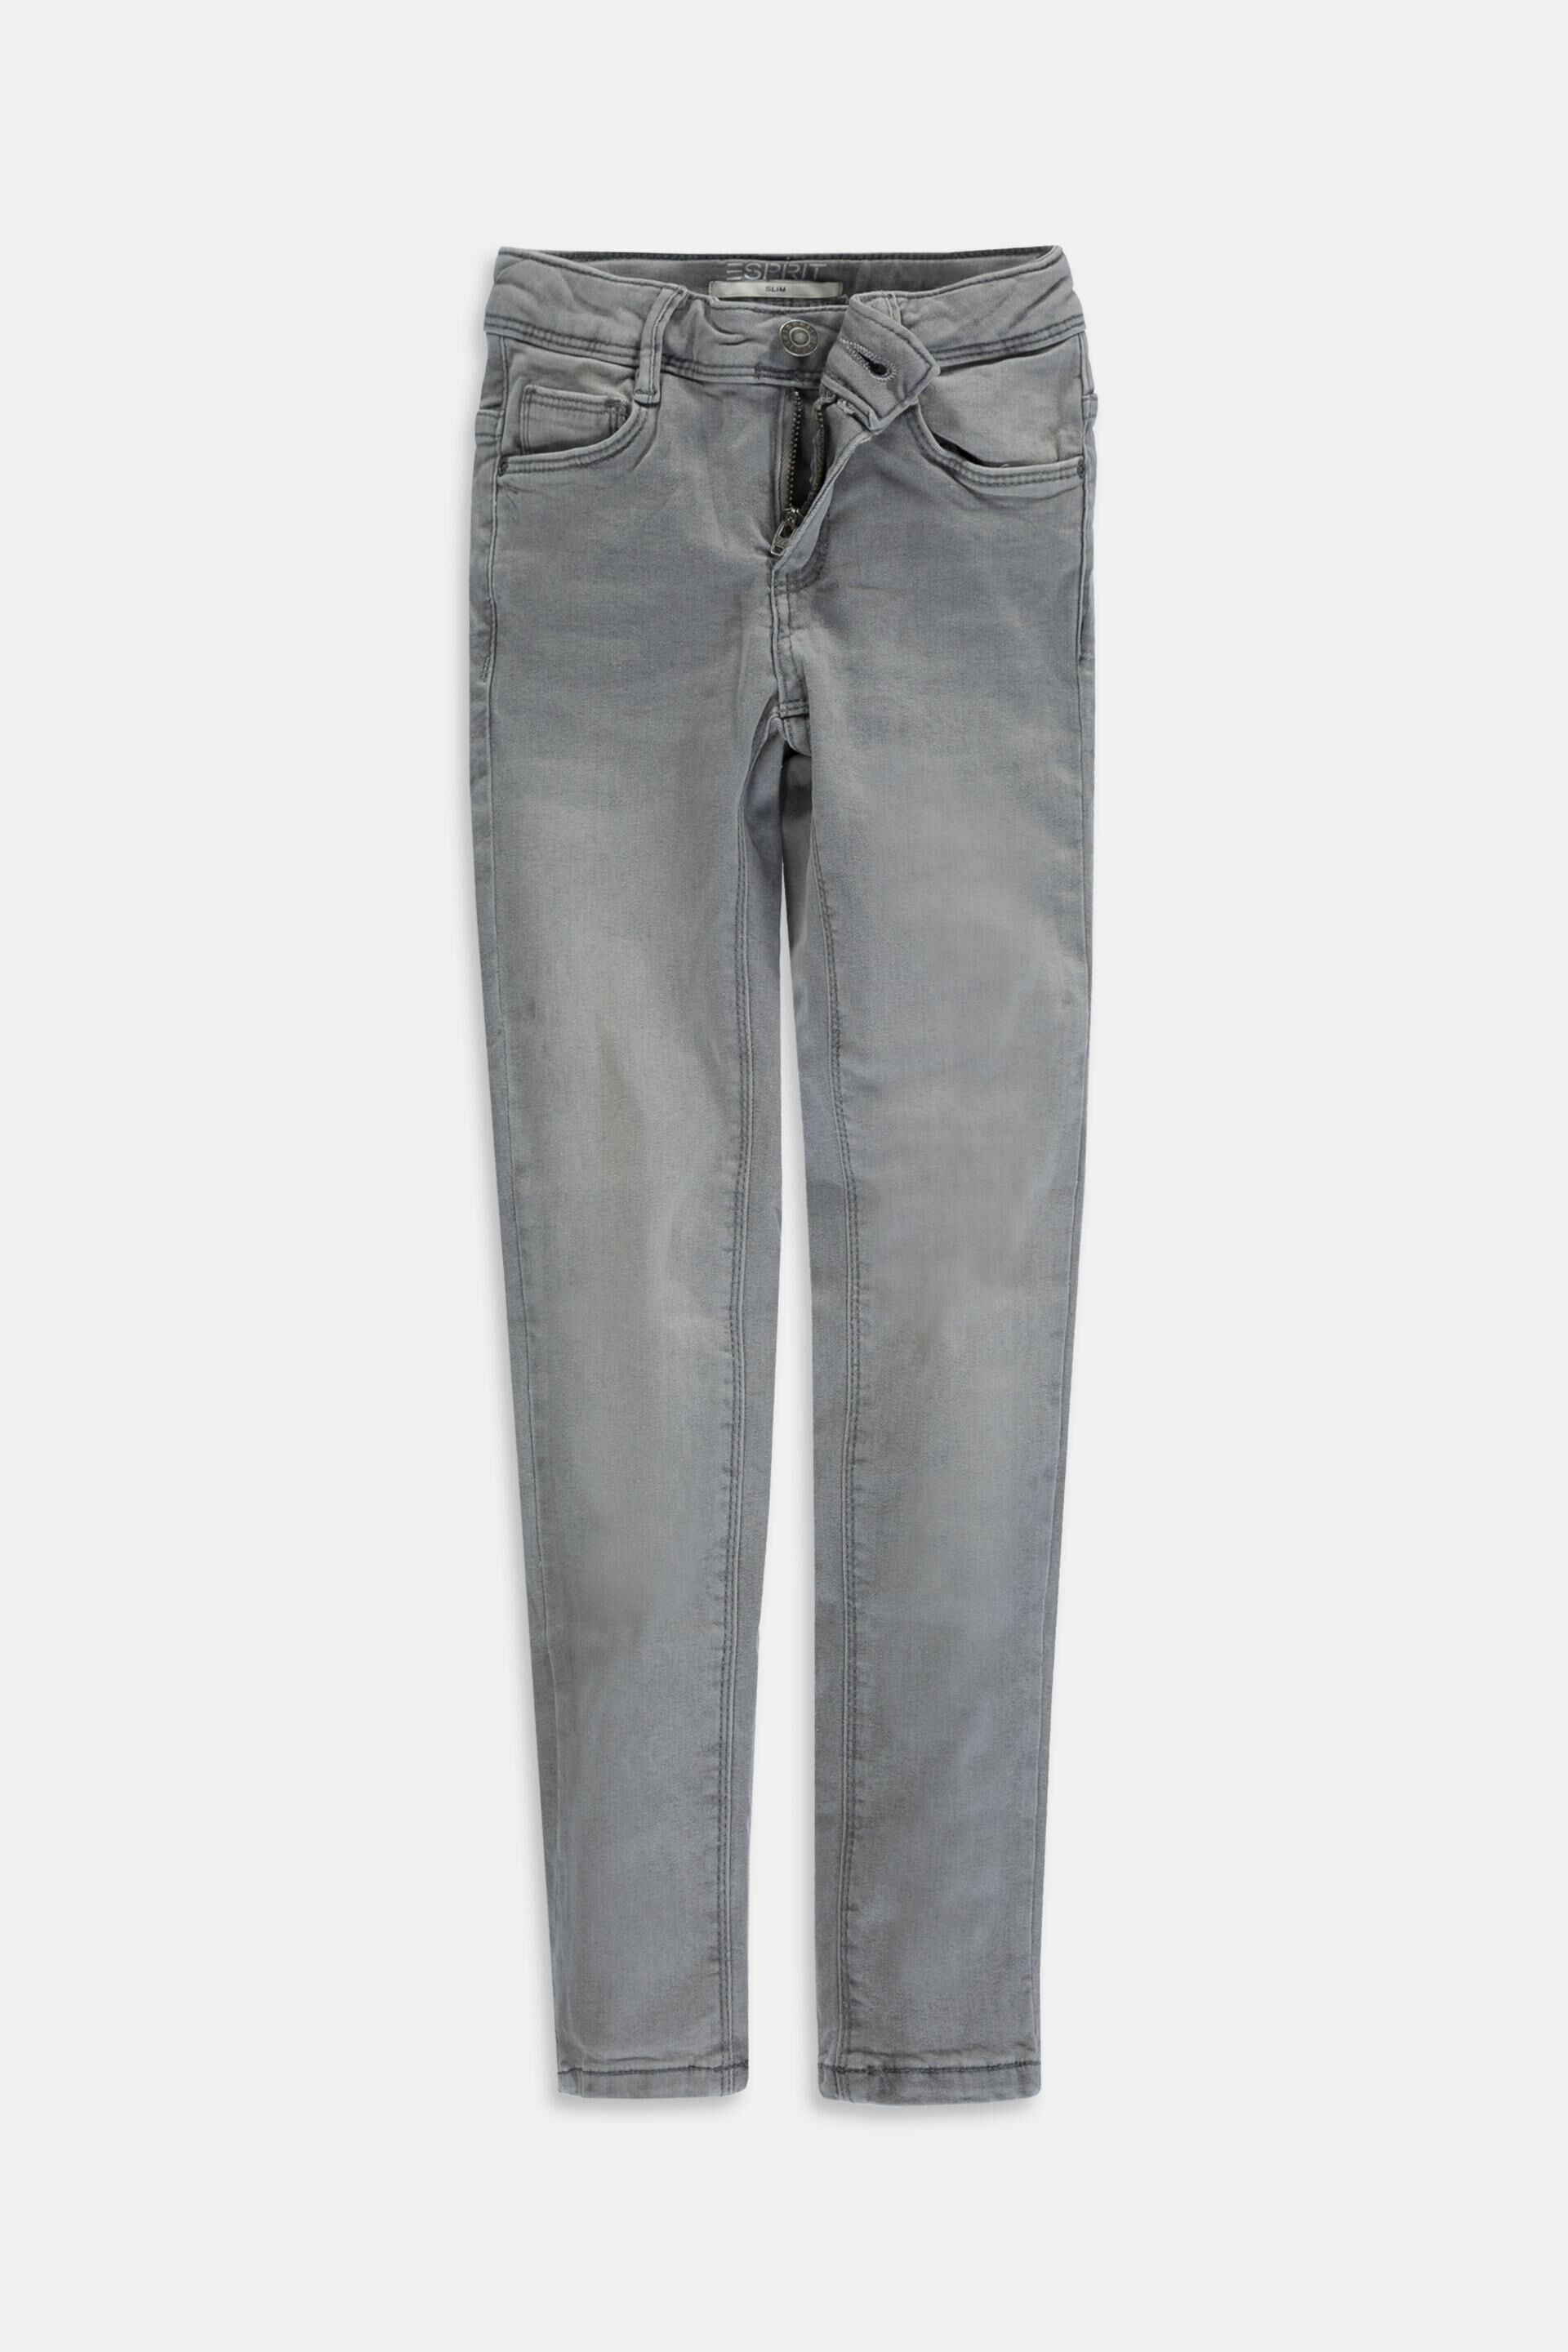 Esprit Outlet Jeans with an adjustable waistband